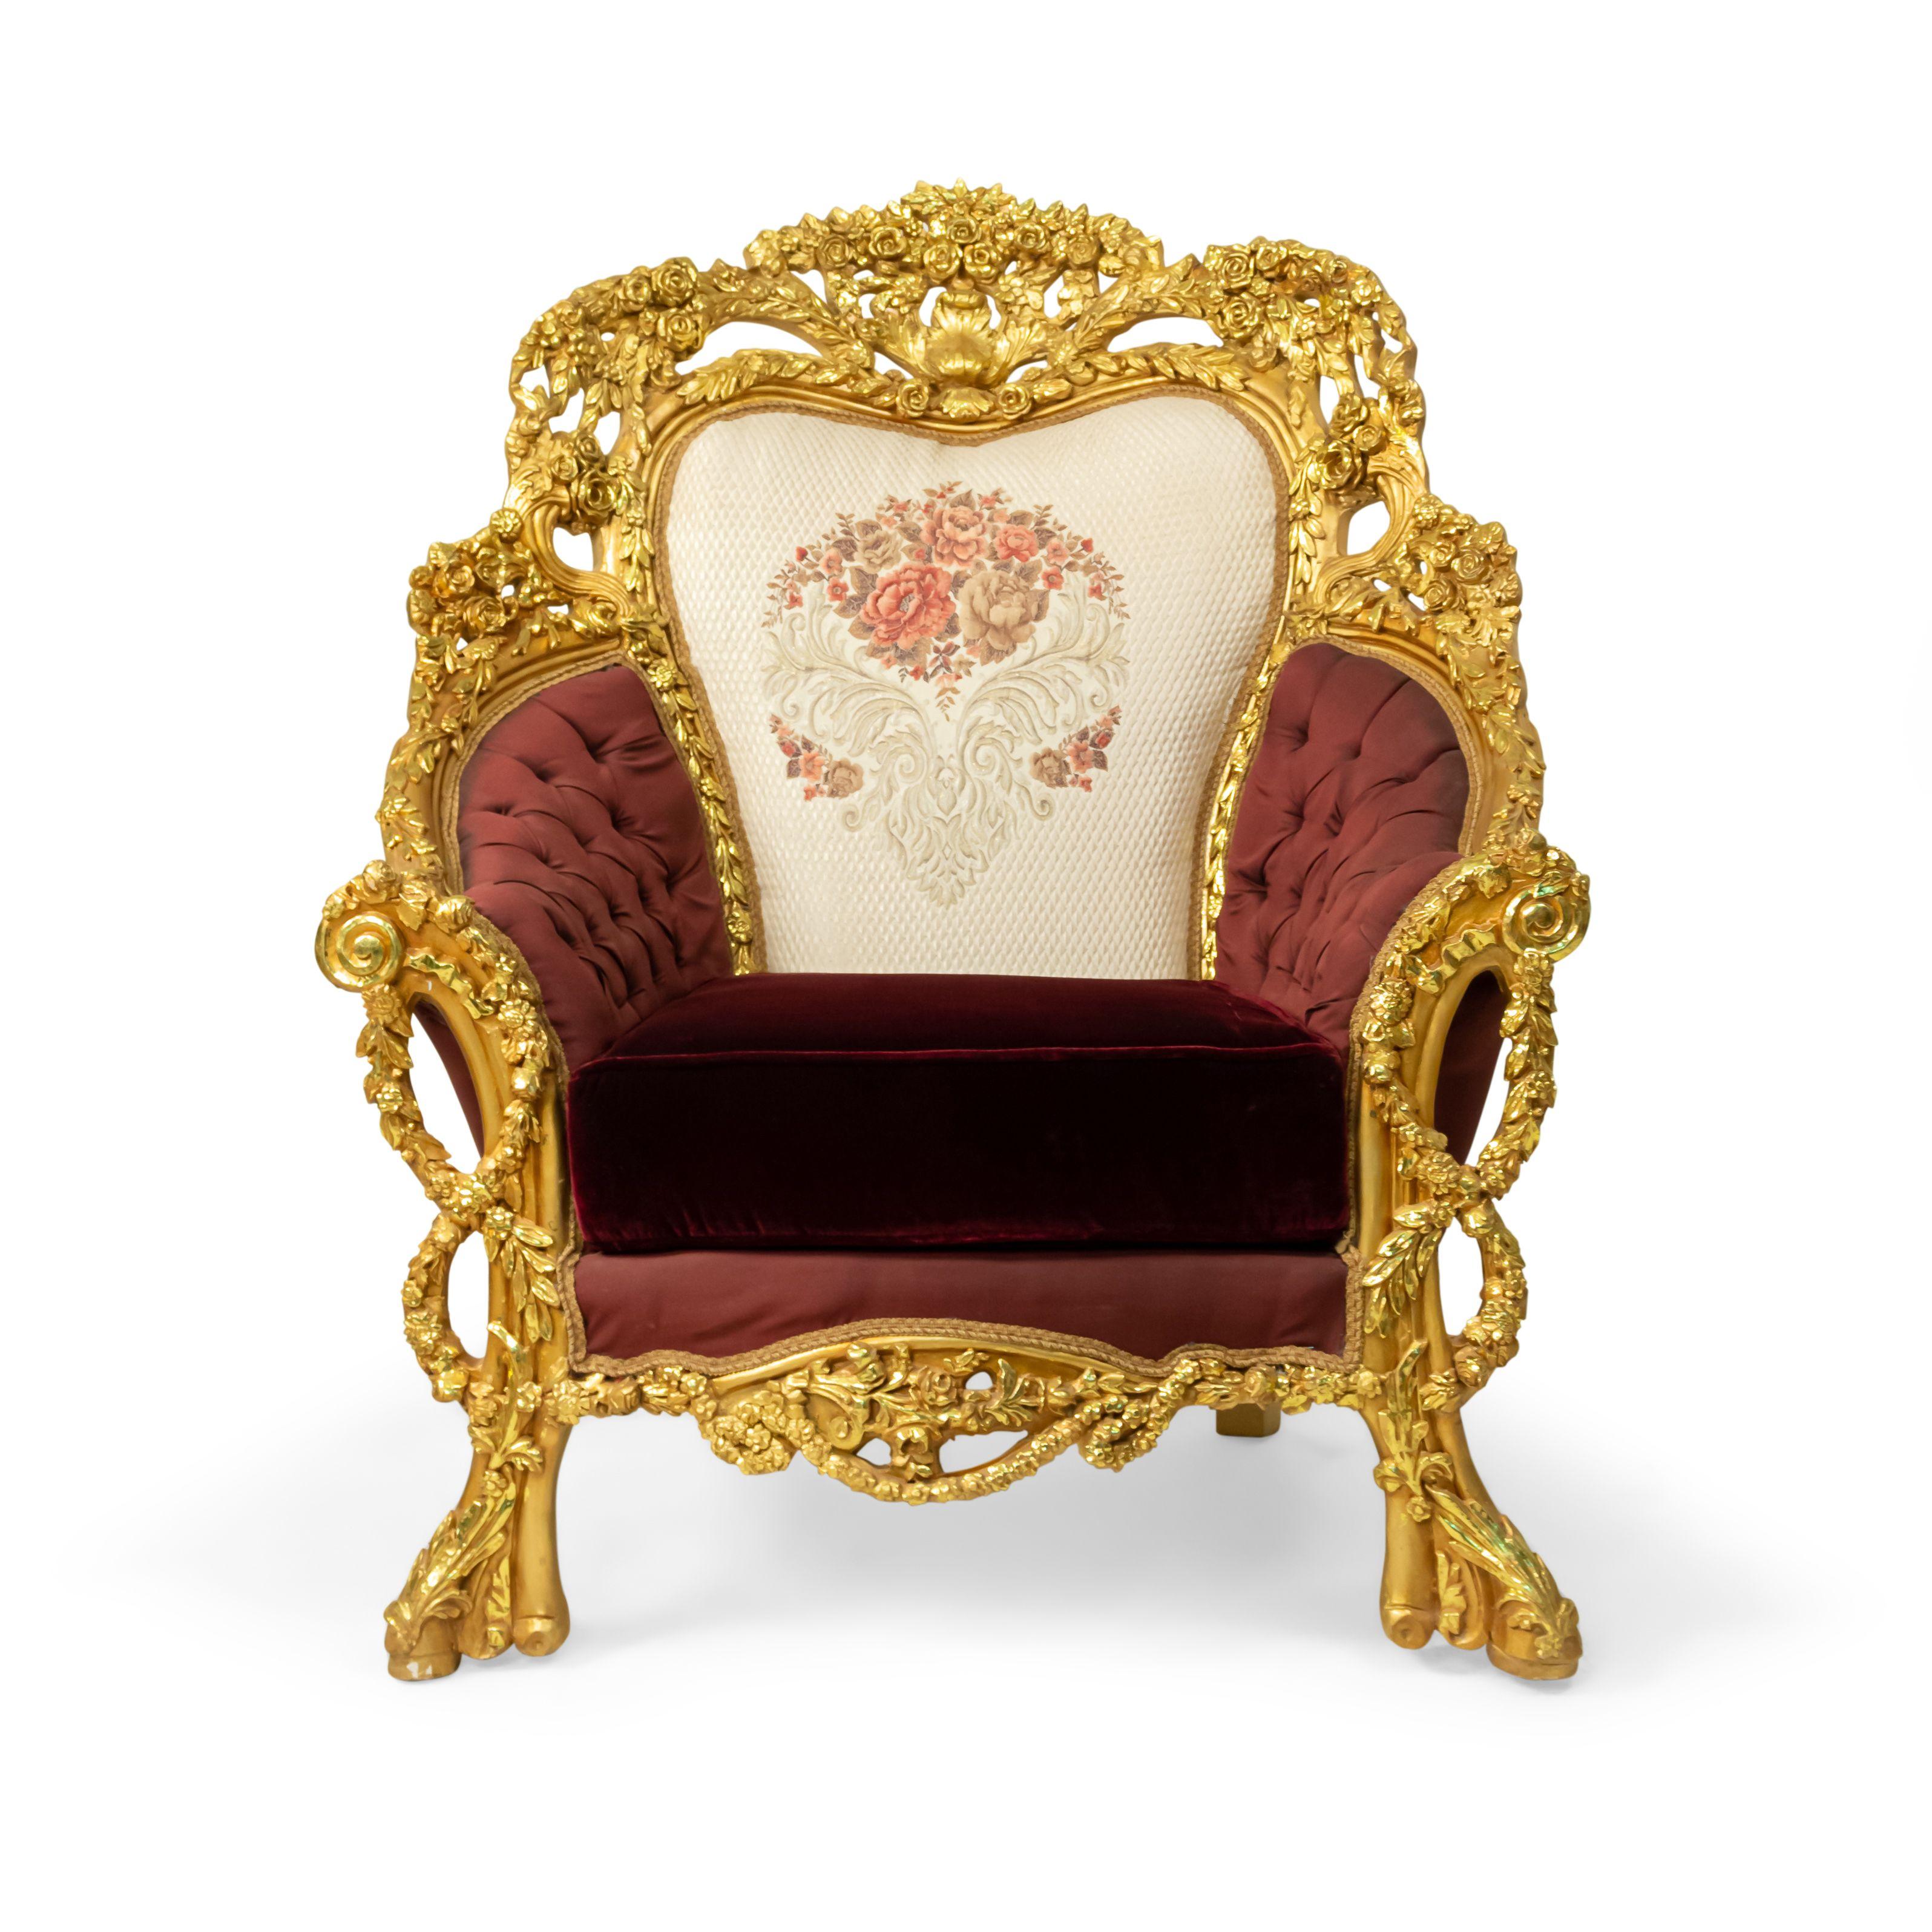 Pair of Italian baroque style 20th century armchairs with giltwood filigree frames, button-tufted burgundy and cream upholstery with embroidered flowers, and burgundy velvet seat cushions.